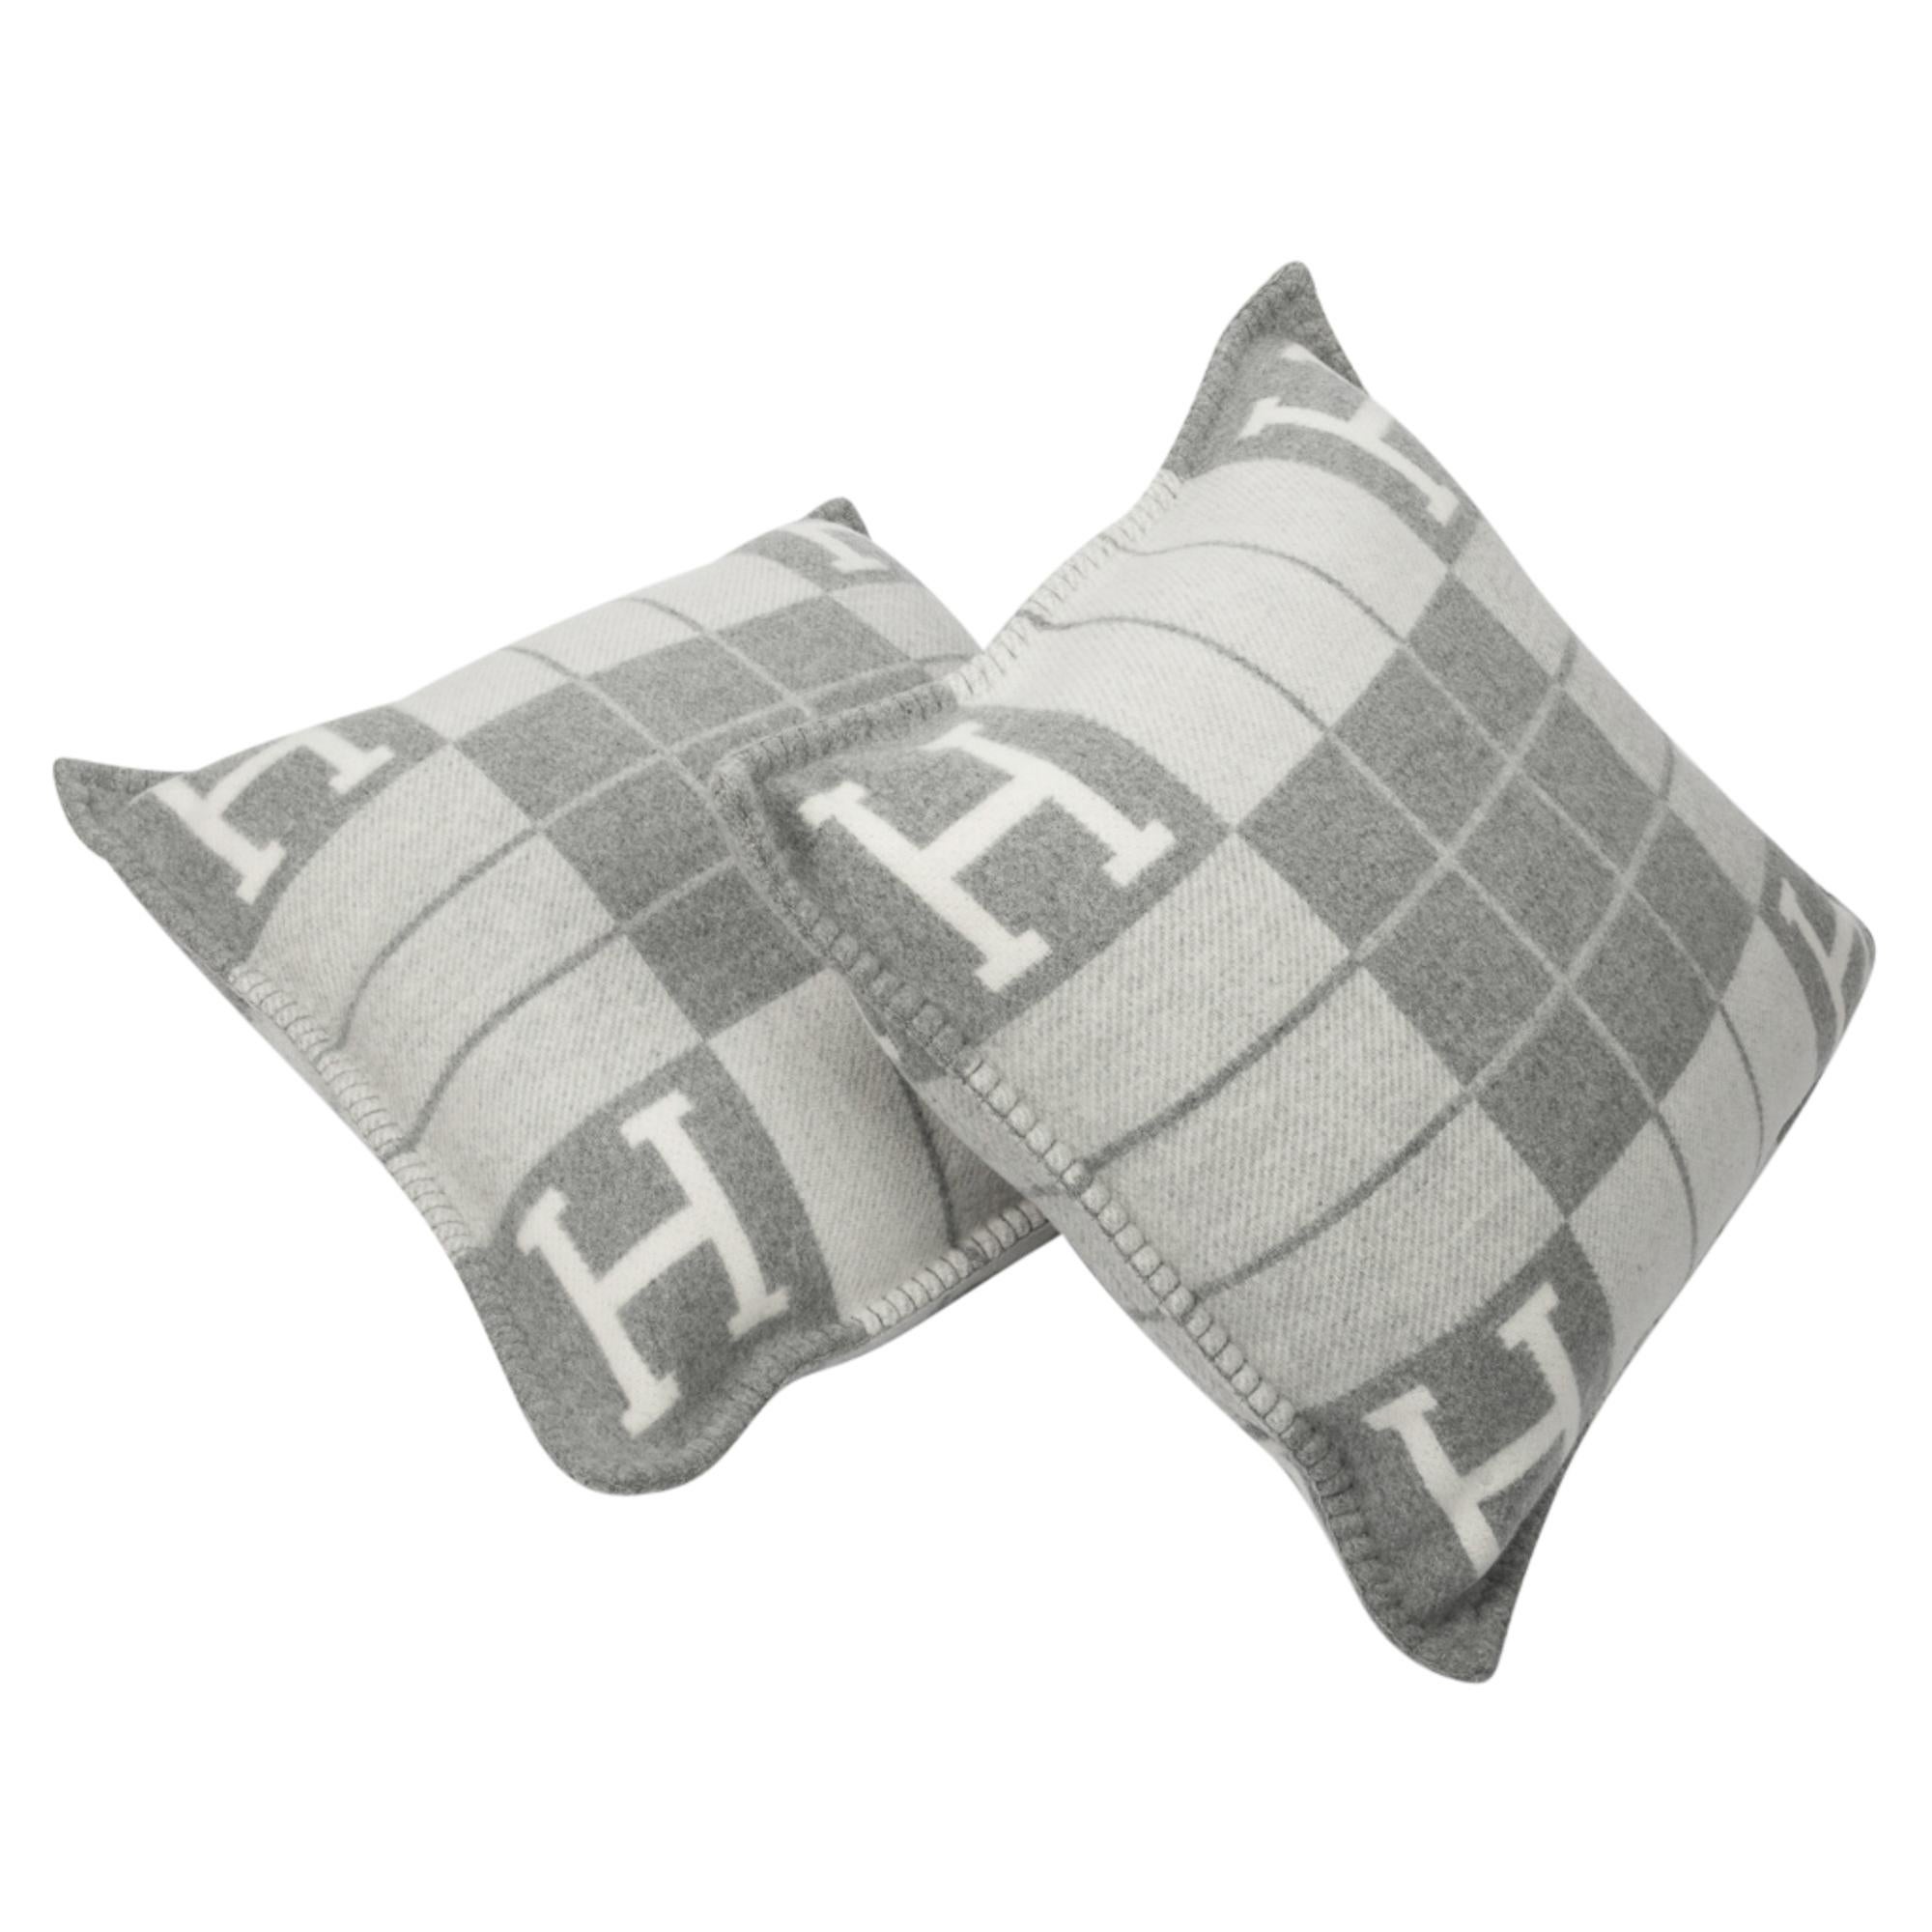 Mightychic offers a set of two (2) Hermes classic PM Avalon III signature H pillow Ecru and Gris Clair.
The removable cover is created from 90% Merino Wool and 10% cashmere and has whip stitch edges.
Comes with sleeper.
New or Pristine Store Fresh